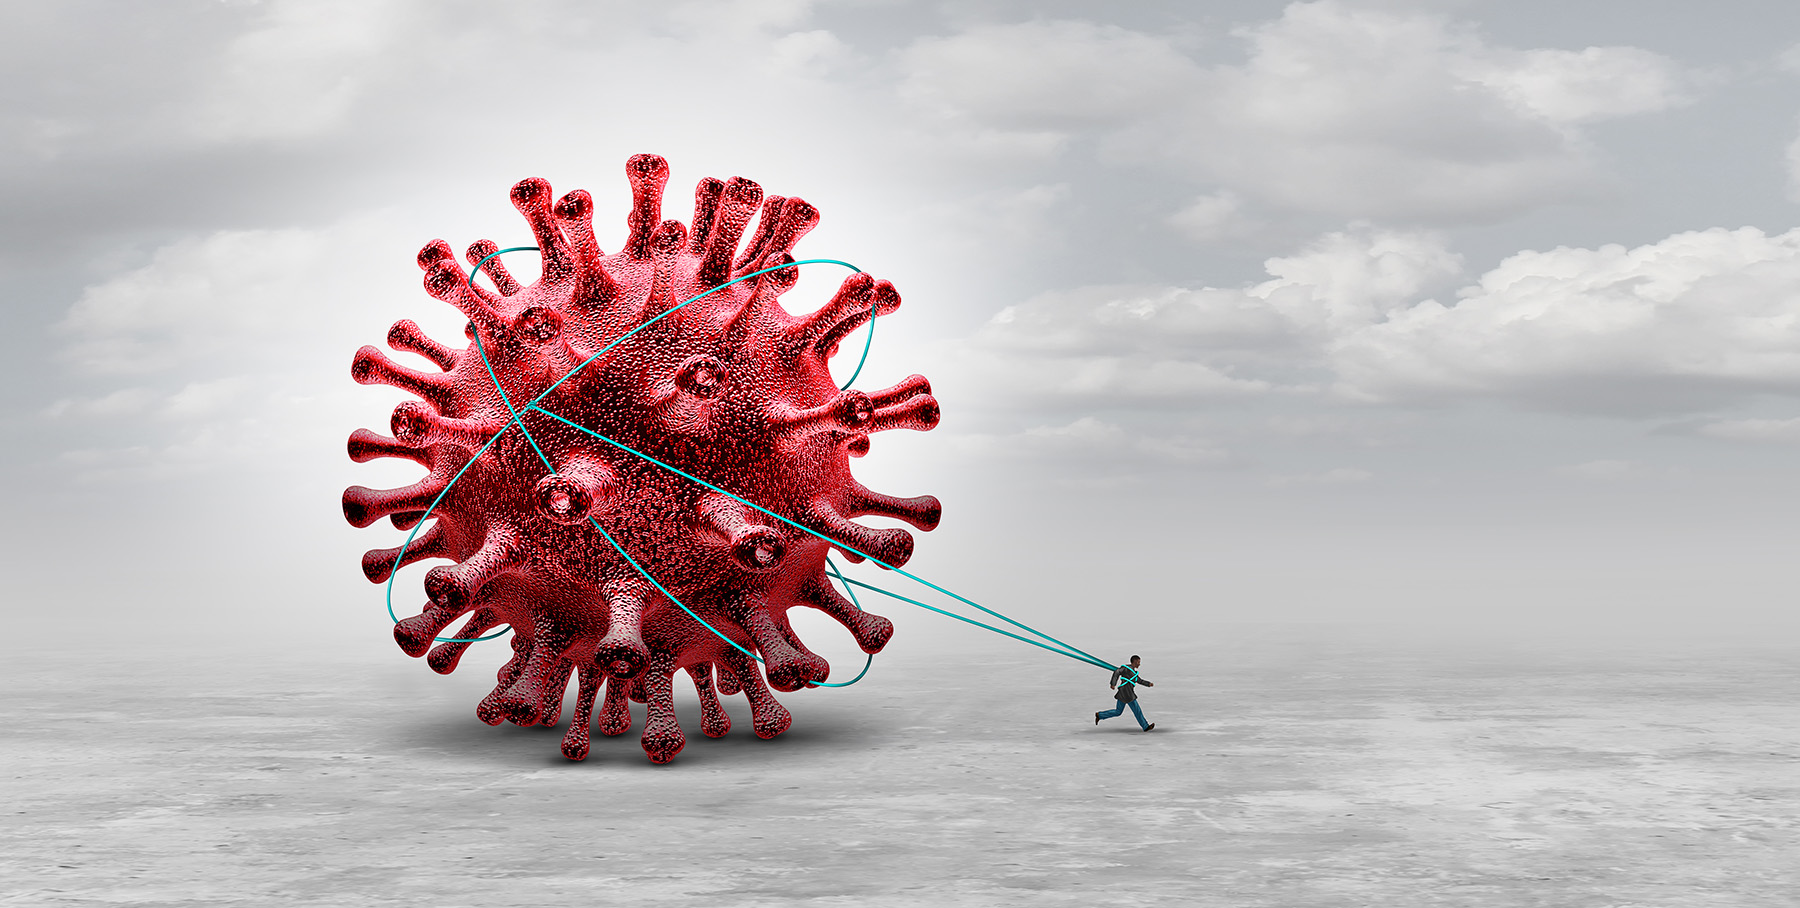 Illustration of a giant coronavirus being hauled via rope by a small human figure